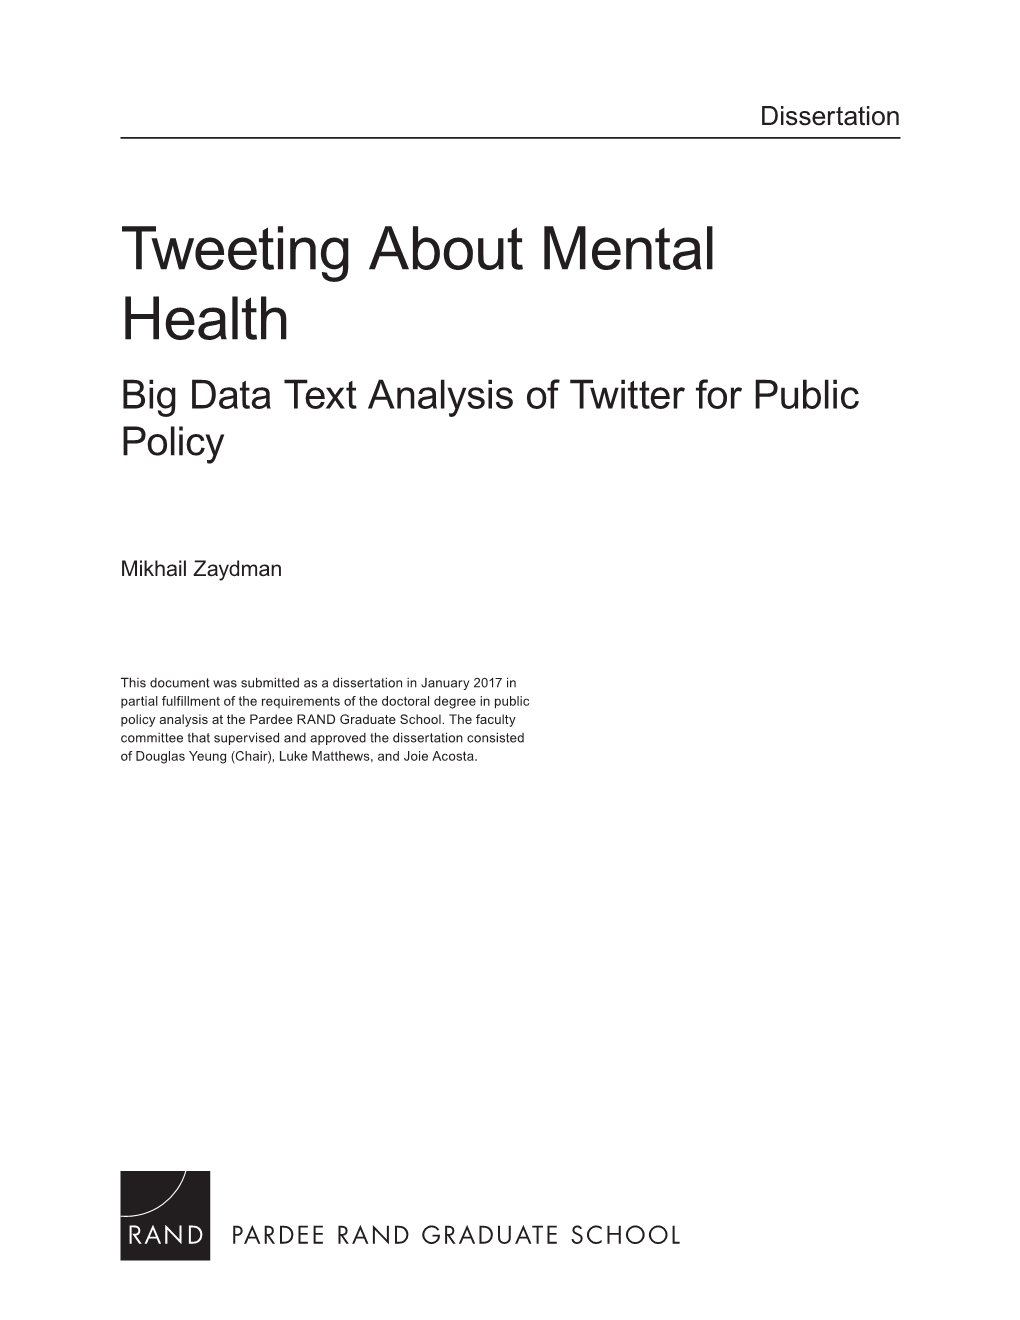 Tweeting About Mental Health: Big Data Text Analysis of Twitter For